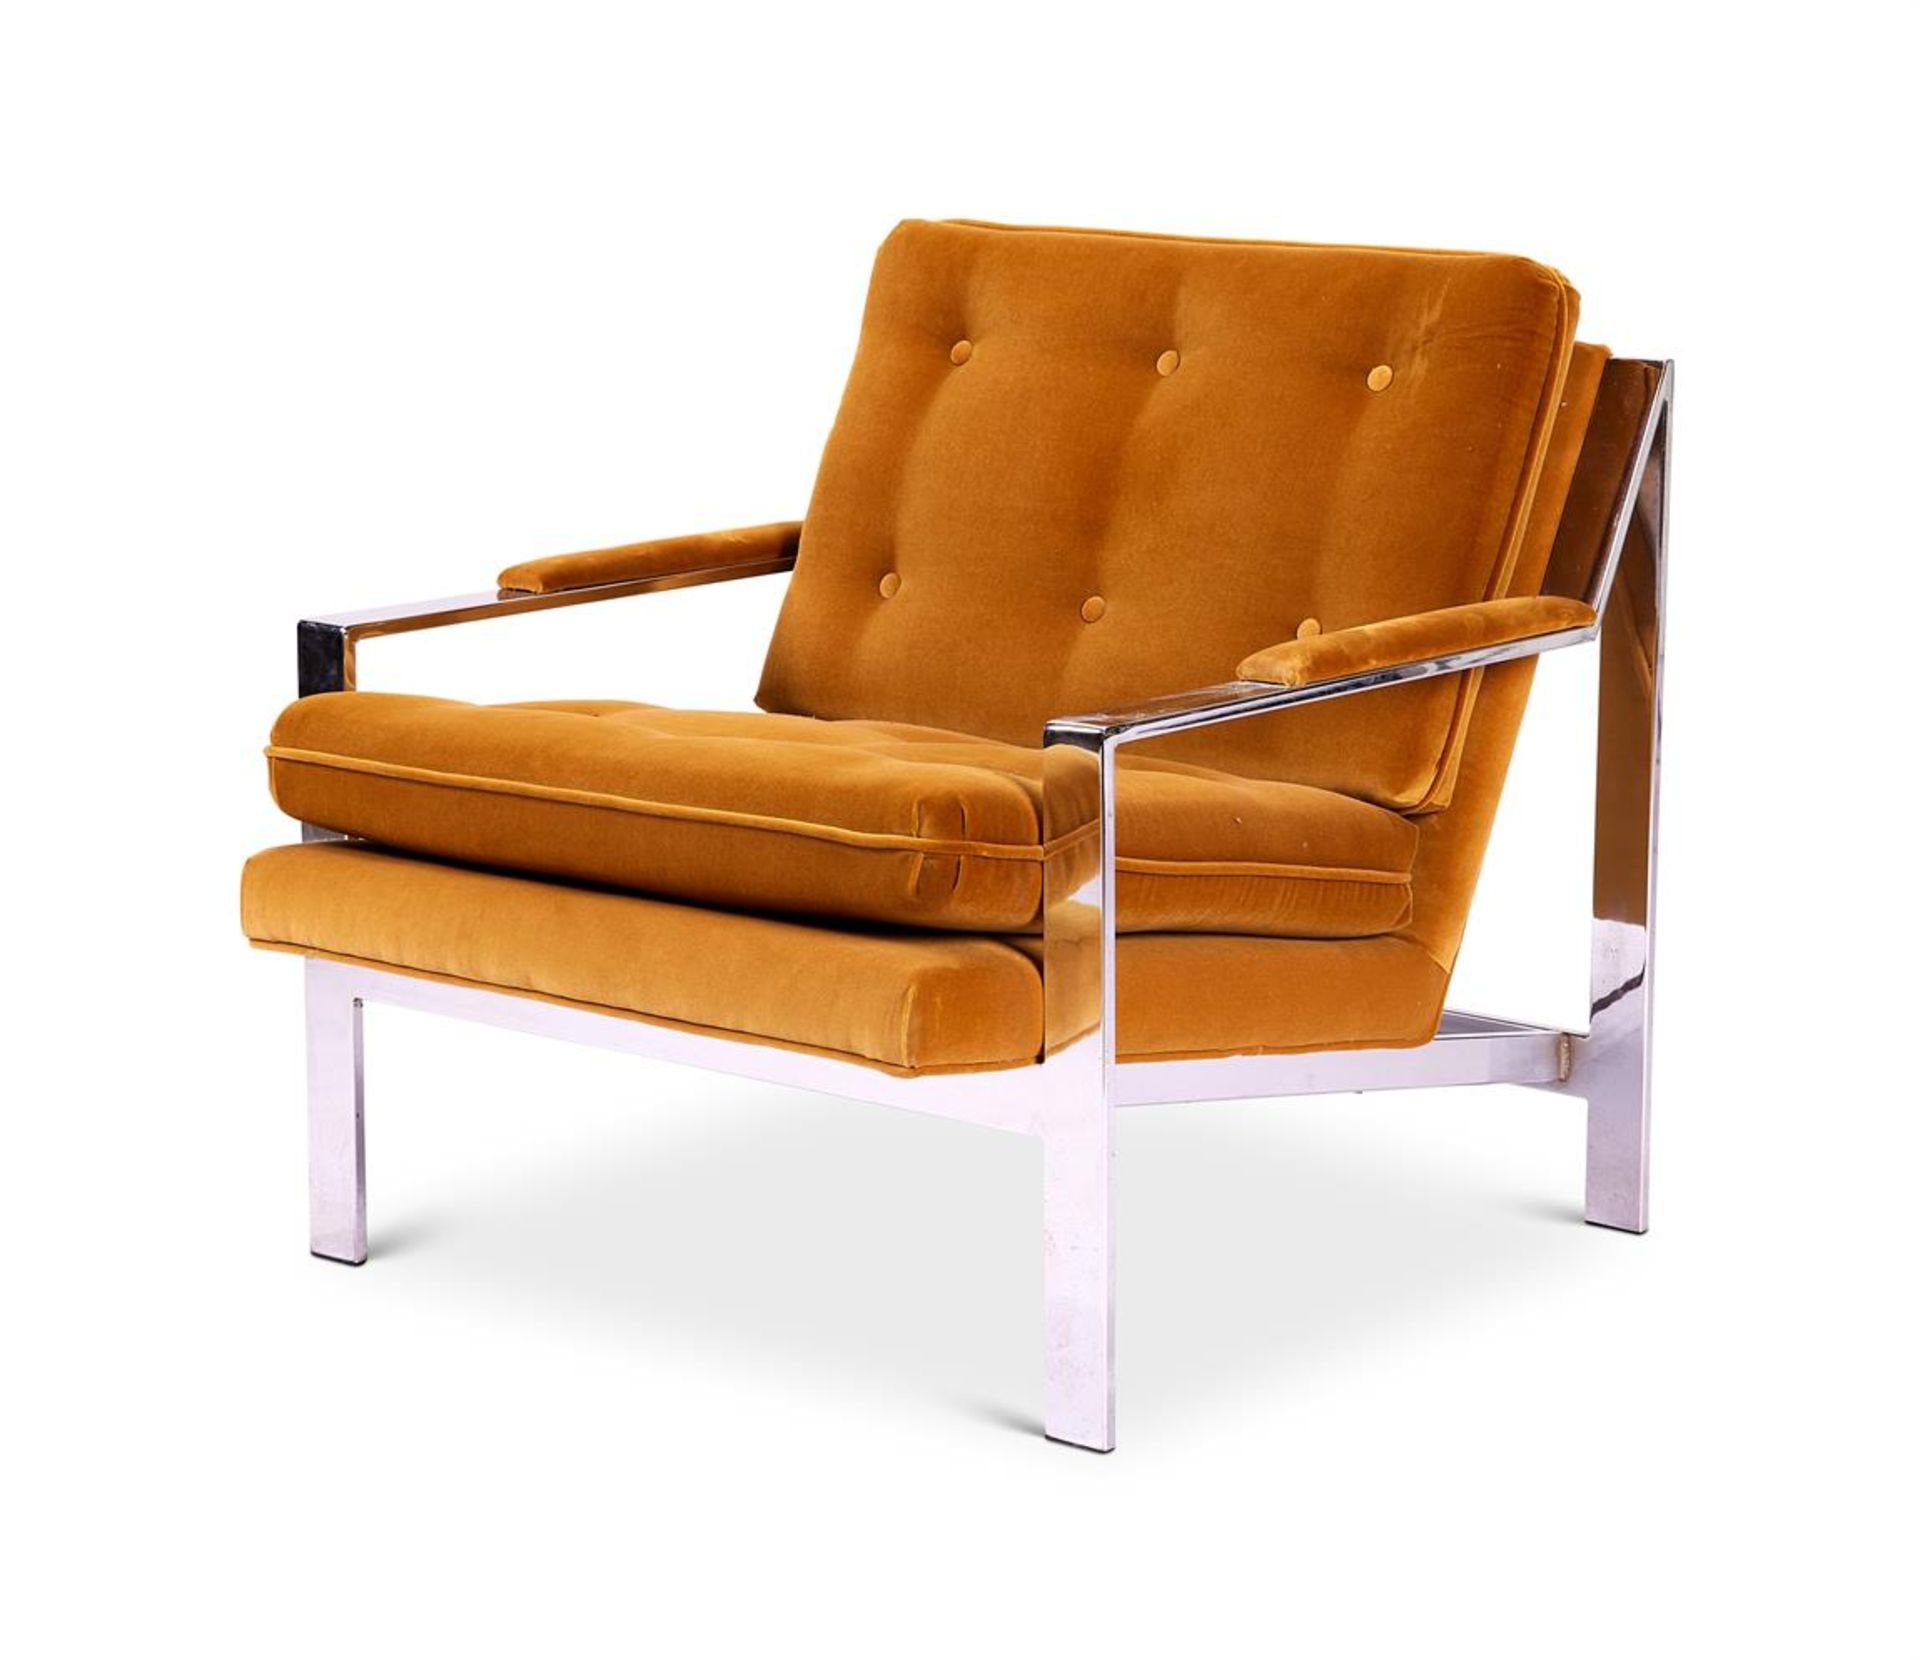 A NICKEL PLATED AND BUTTON UPHOLSTERED ARMCHAIR DESIGNED BY CY MANN, CIRCA 1970